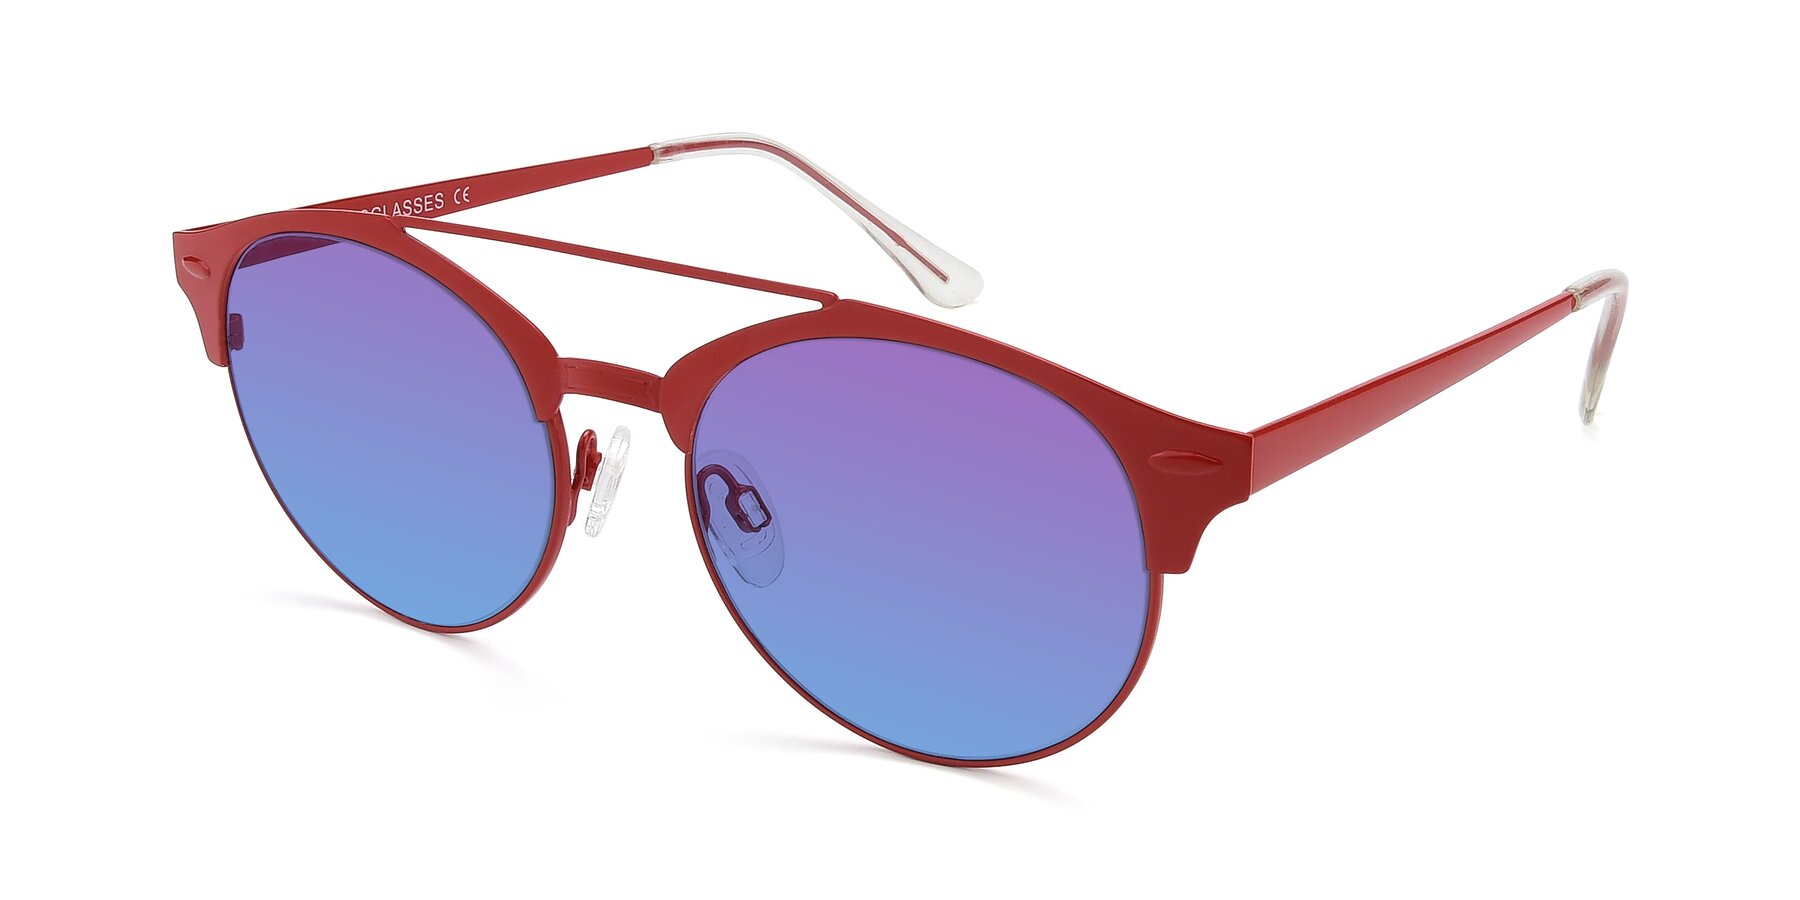 Angle of SSR183 in Red with Purple / Blue Gradient Lenses